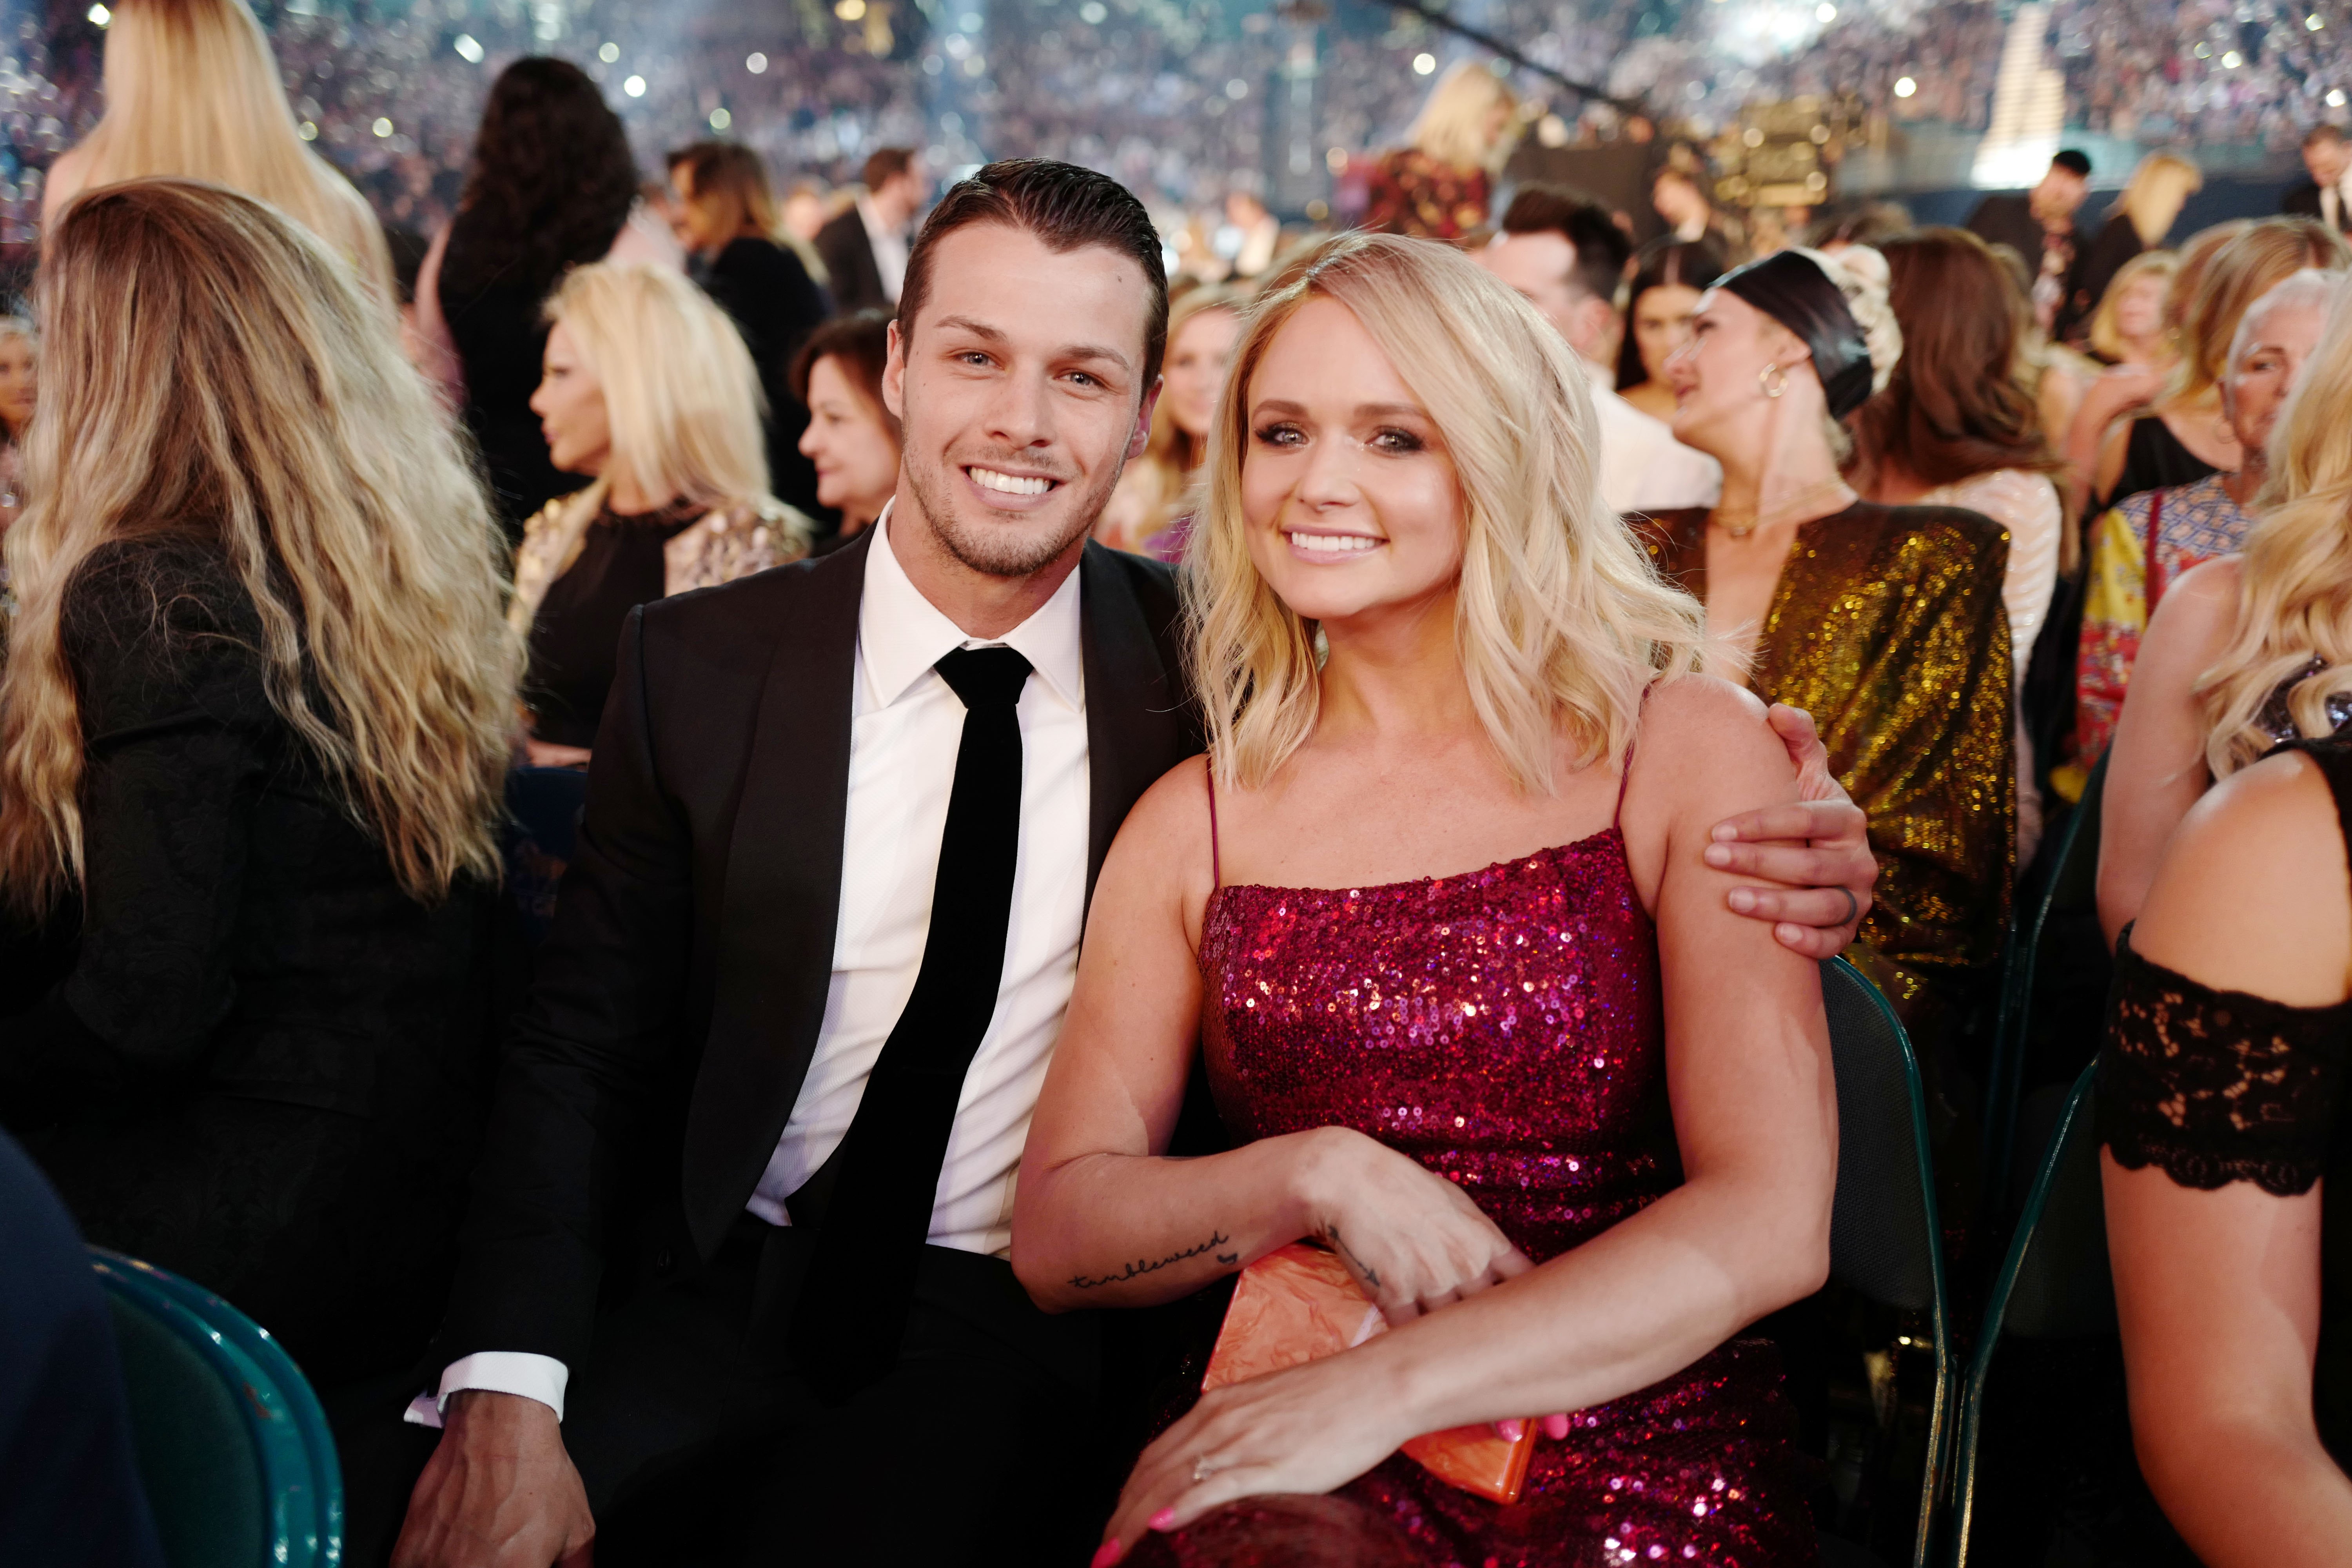 Brendan McLoughlin and Miranda Lambert at the 54th Academy Of Country Music Awards at MGM Grand Garden Arena on April 07, 2019 in Las Vegas, Nevada | Photo: Getty Images